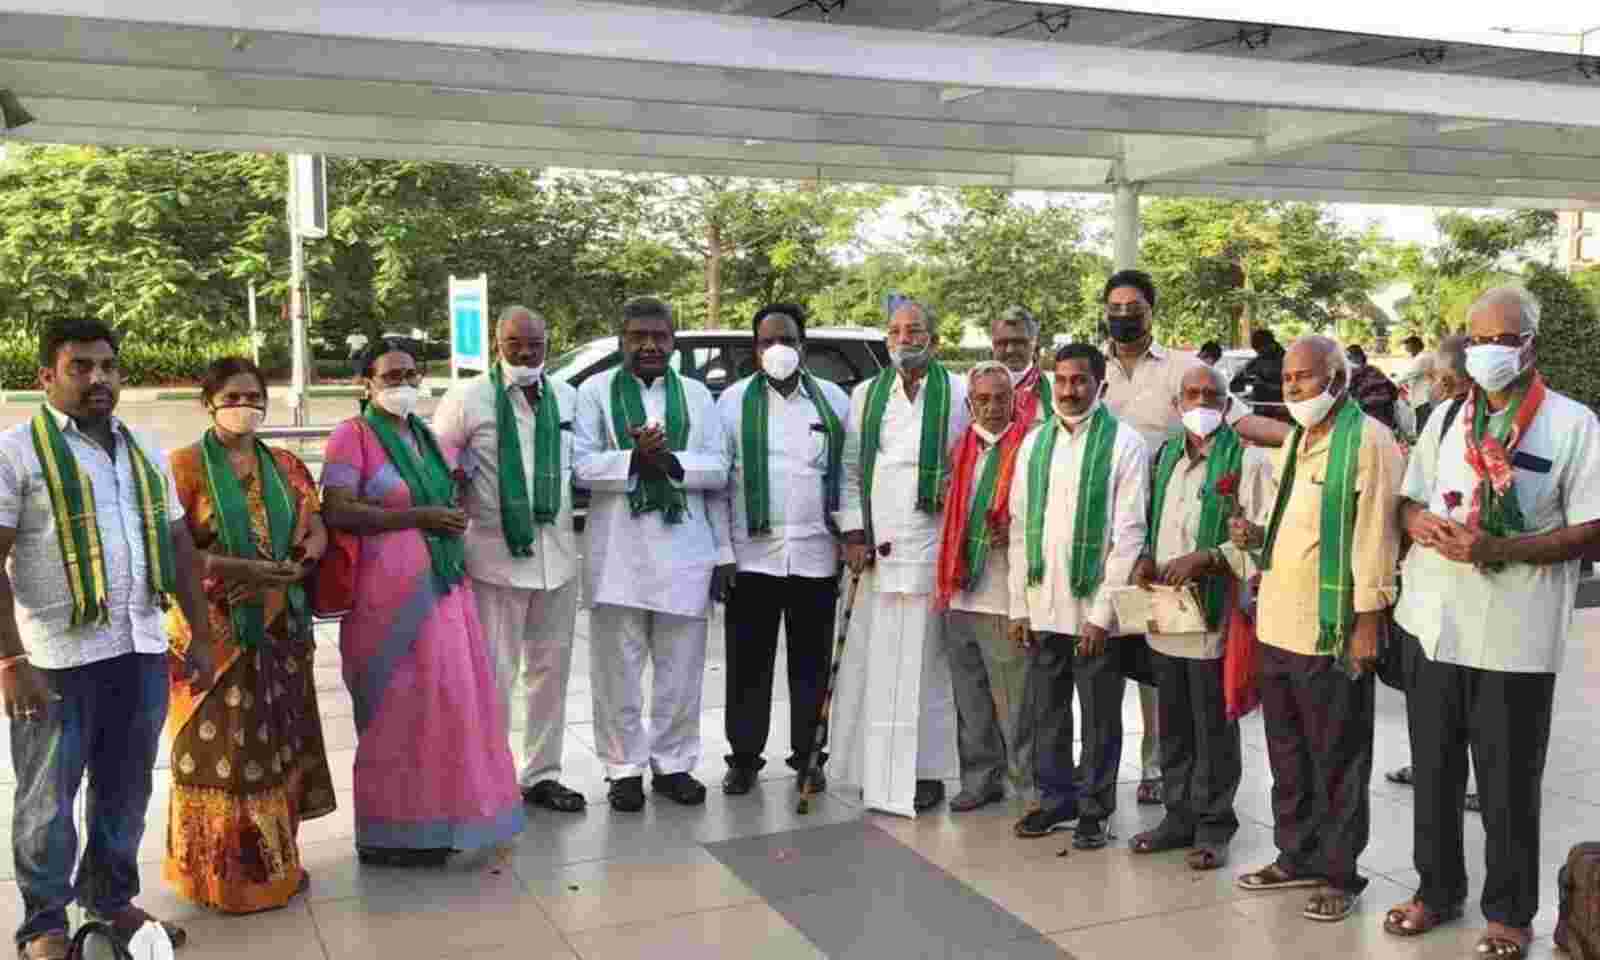 Andhra Pradesh: Joint struggles being planned for a fair deal to farmers, says AIKS leader